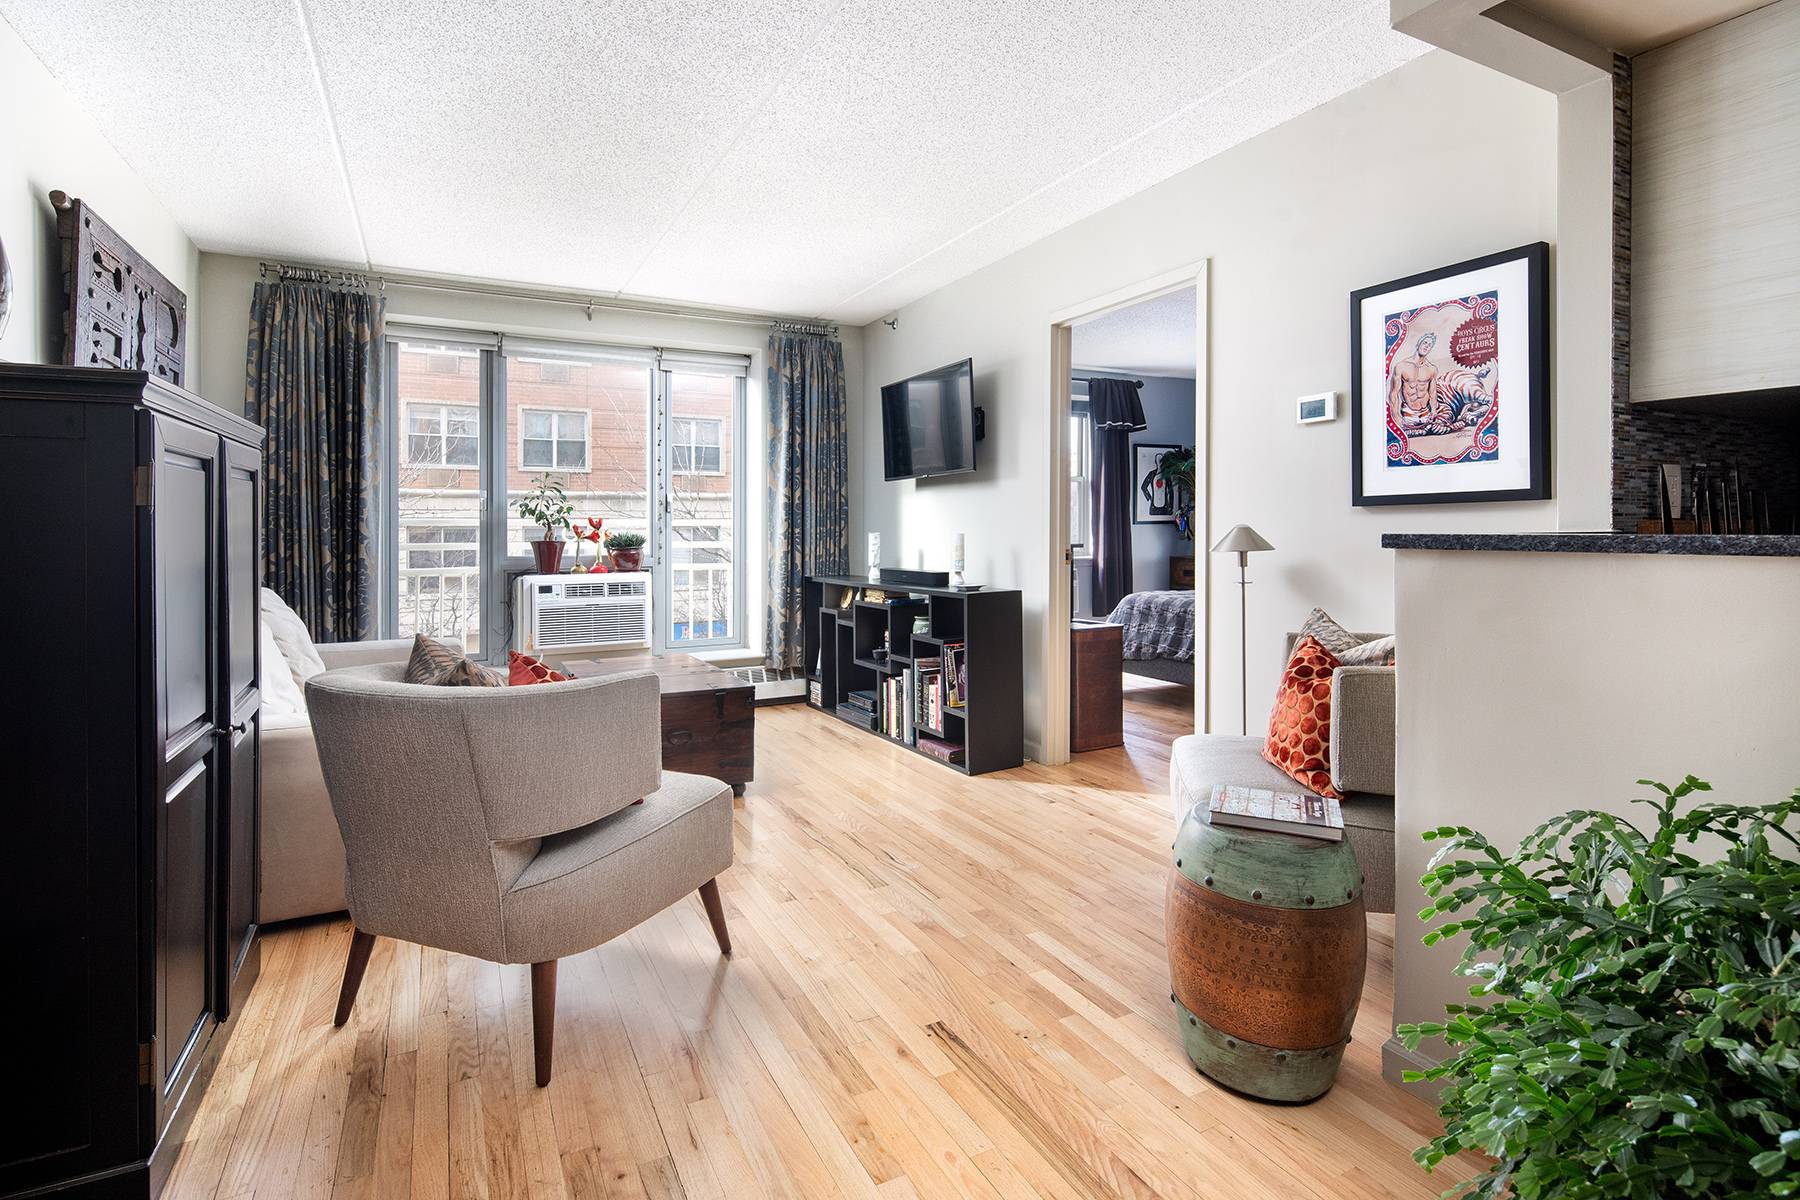 HARLEM BEAUTIFULLY RENOVATED 2 BDRMS 2BTHS 649, 000 Unit 3K is a split 2 bedroom, 2 full bath apartment with southern exposures.